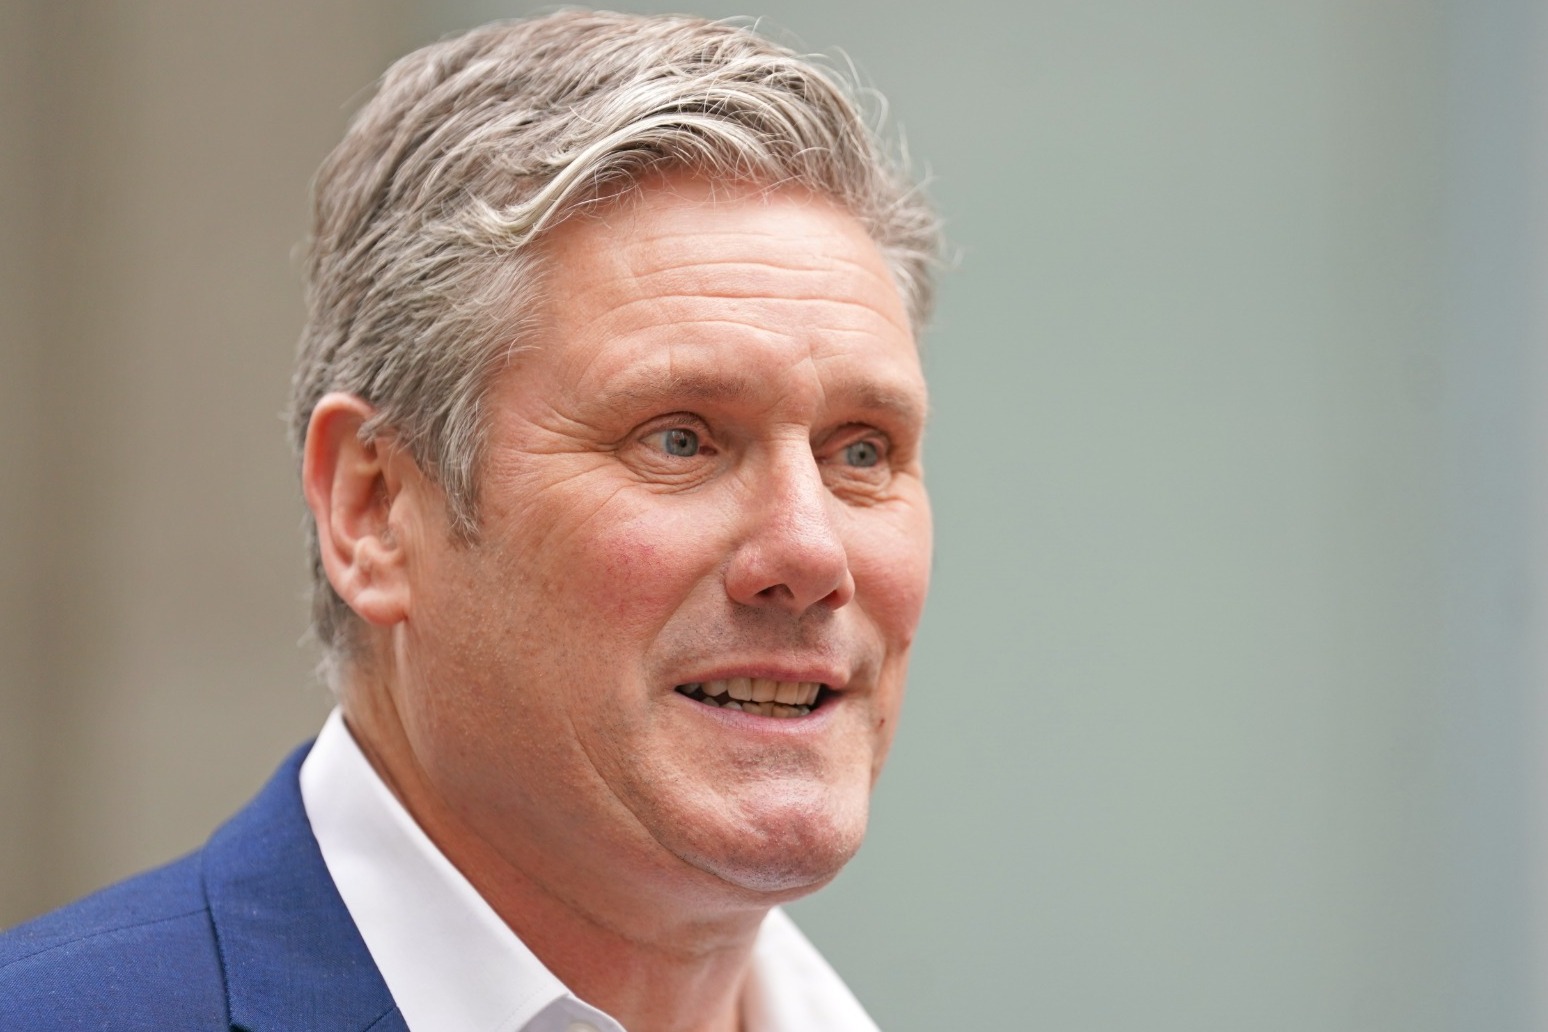 Keir Starmer commits to doing the ‘right thing’ and resign if fined by police 